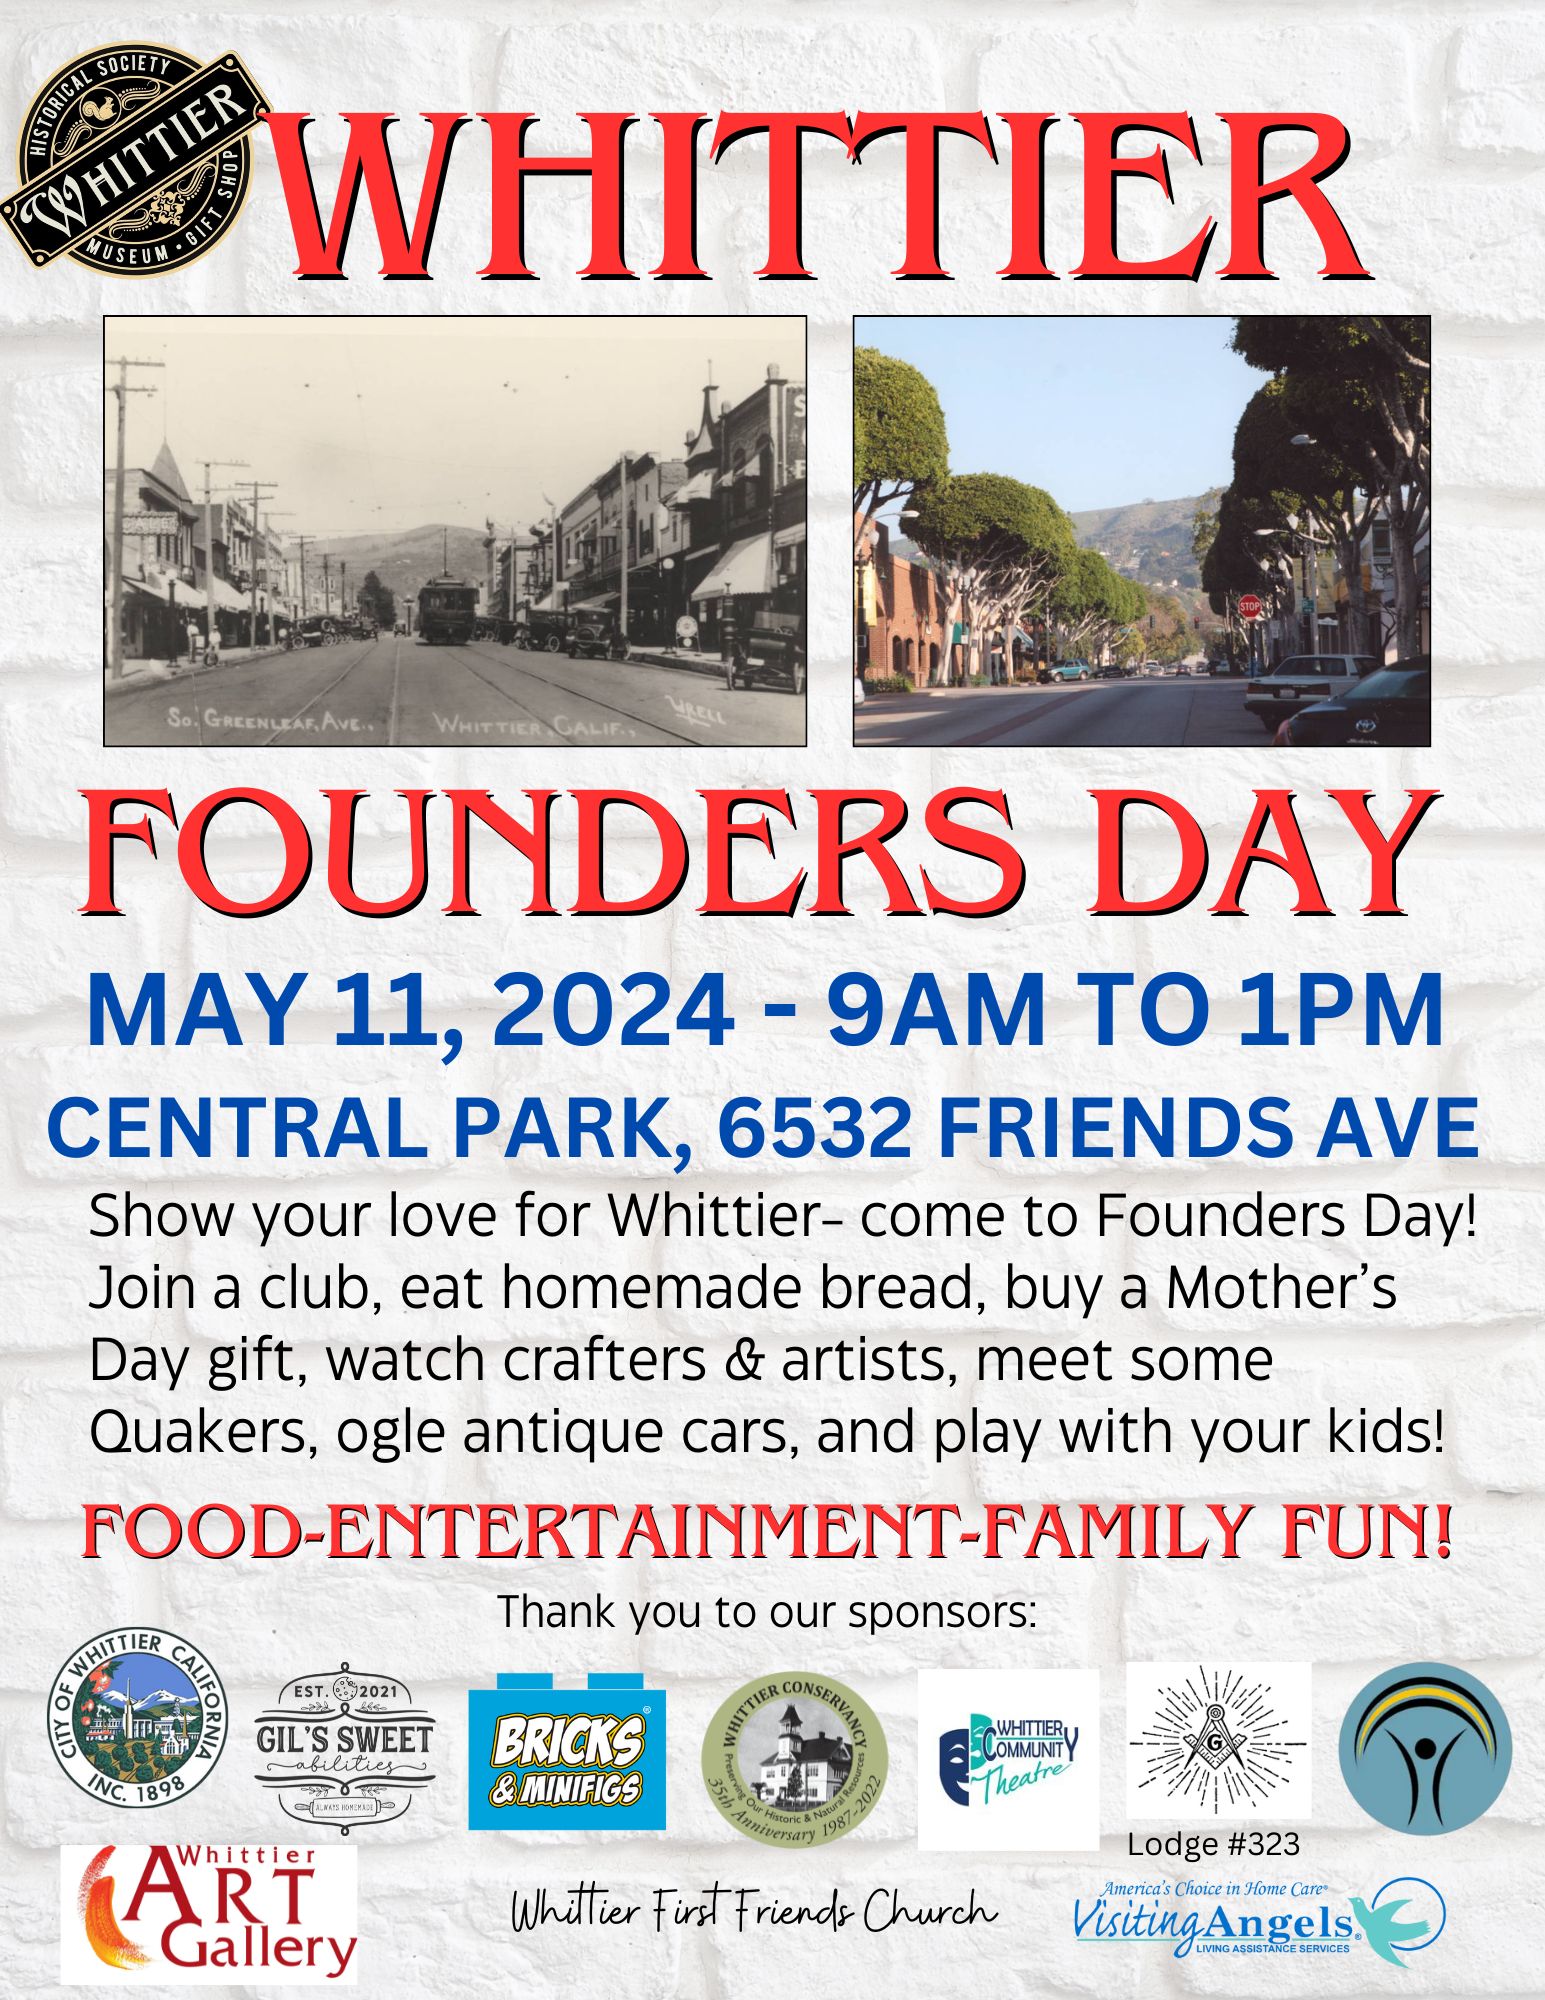 Founders Day flier showing two images of Greenleaf Ave. looking north. One from the early 1900s and one from circa 2010.